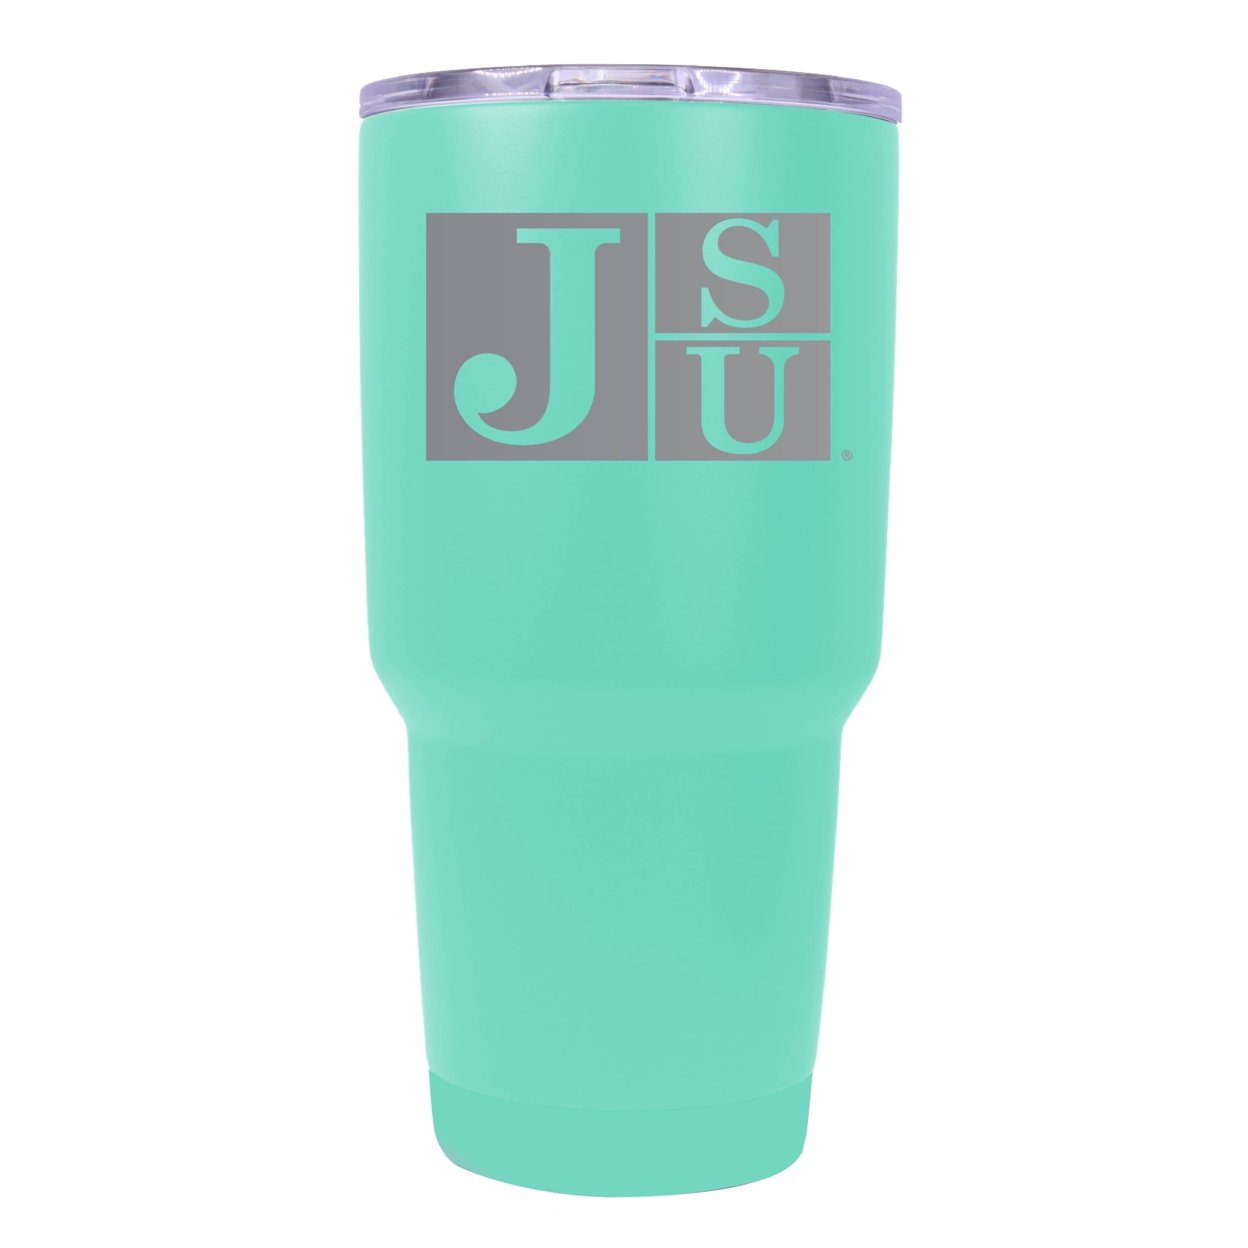 Jackson State University 24 Oz Laser Engraved Stainless Steel Insulated Tumbler - Choose Your Color. - Seafoam